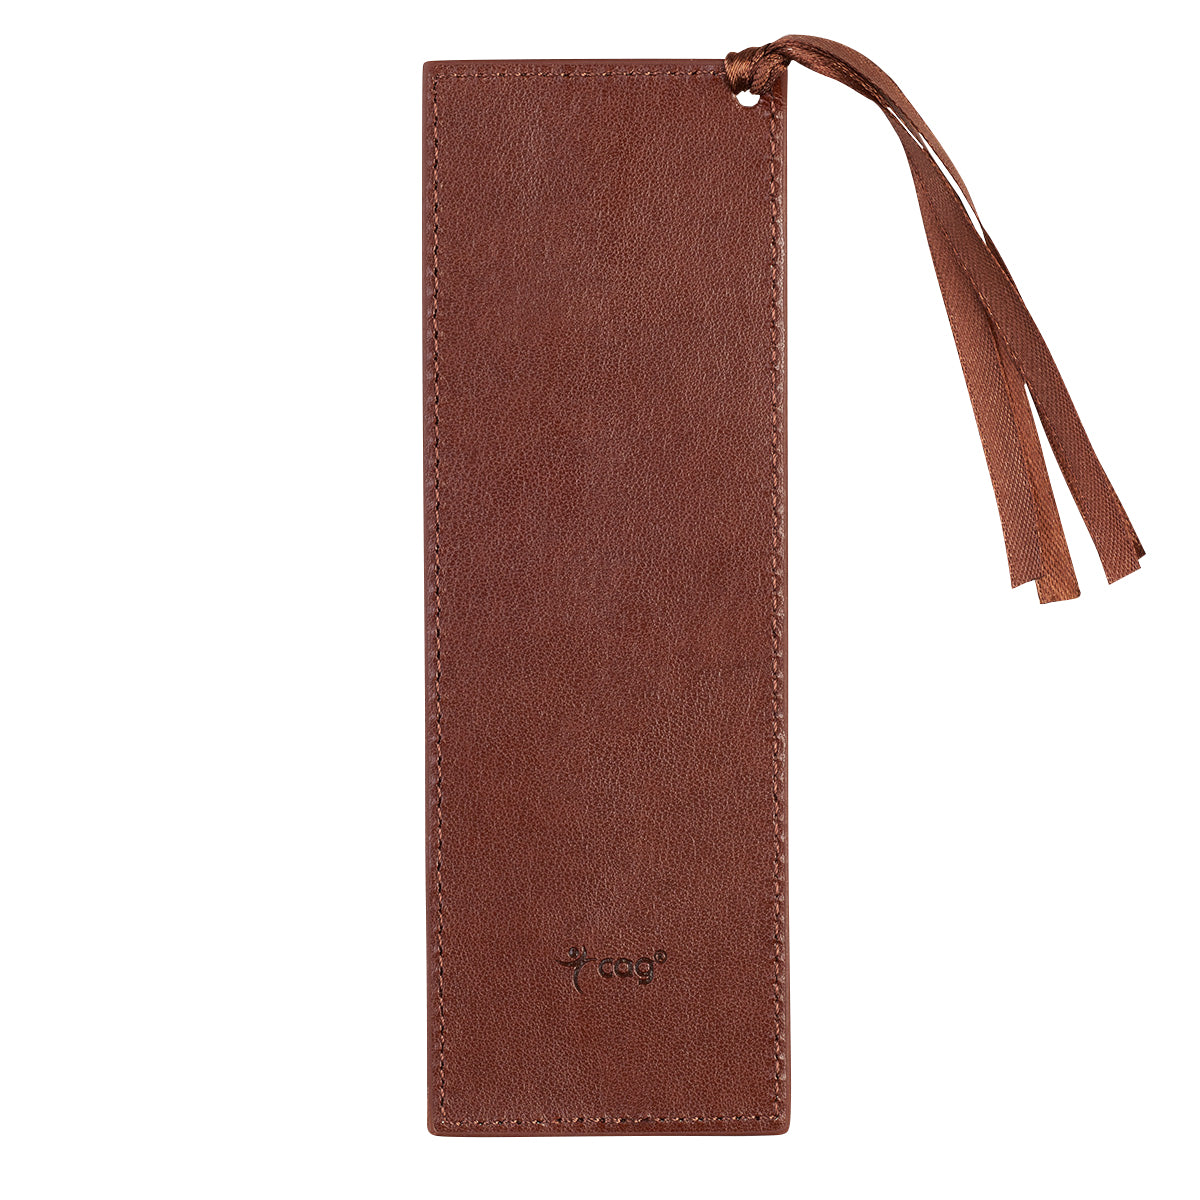 Steadfast Love of The LORD Brown Two-tone Faux Leather Bookmark - Lamentations 3:22-23 - The Christian Gift Company